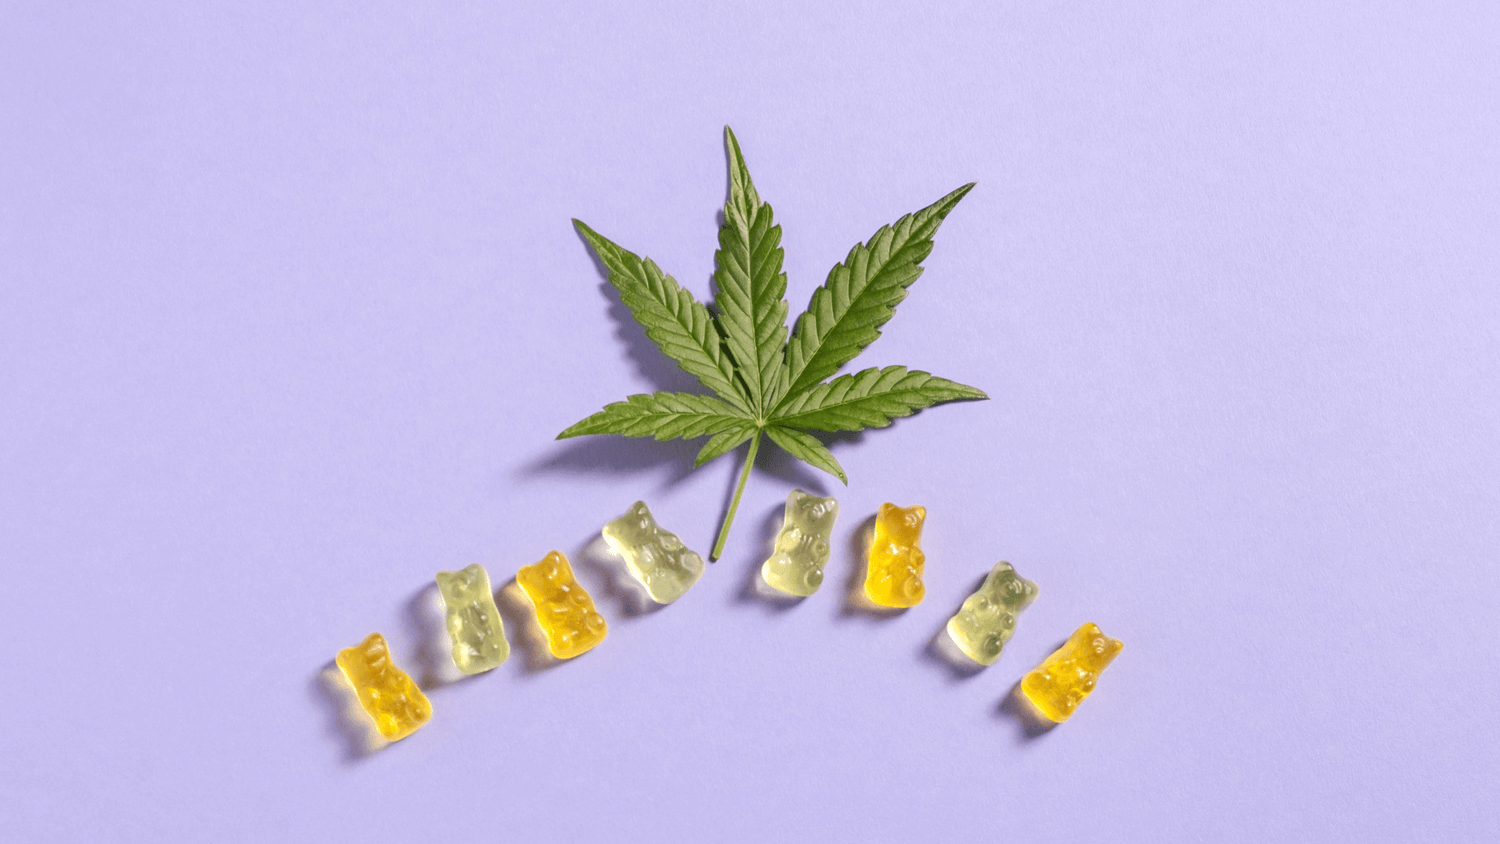 A THC plant and DIY cannabis infused gummy bears